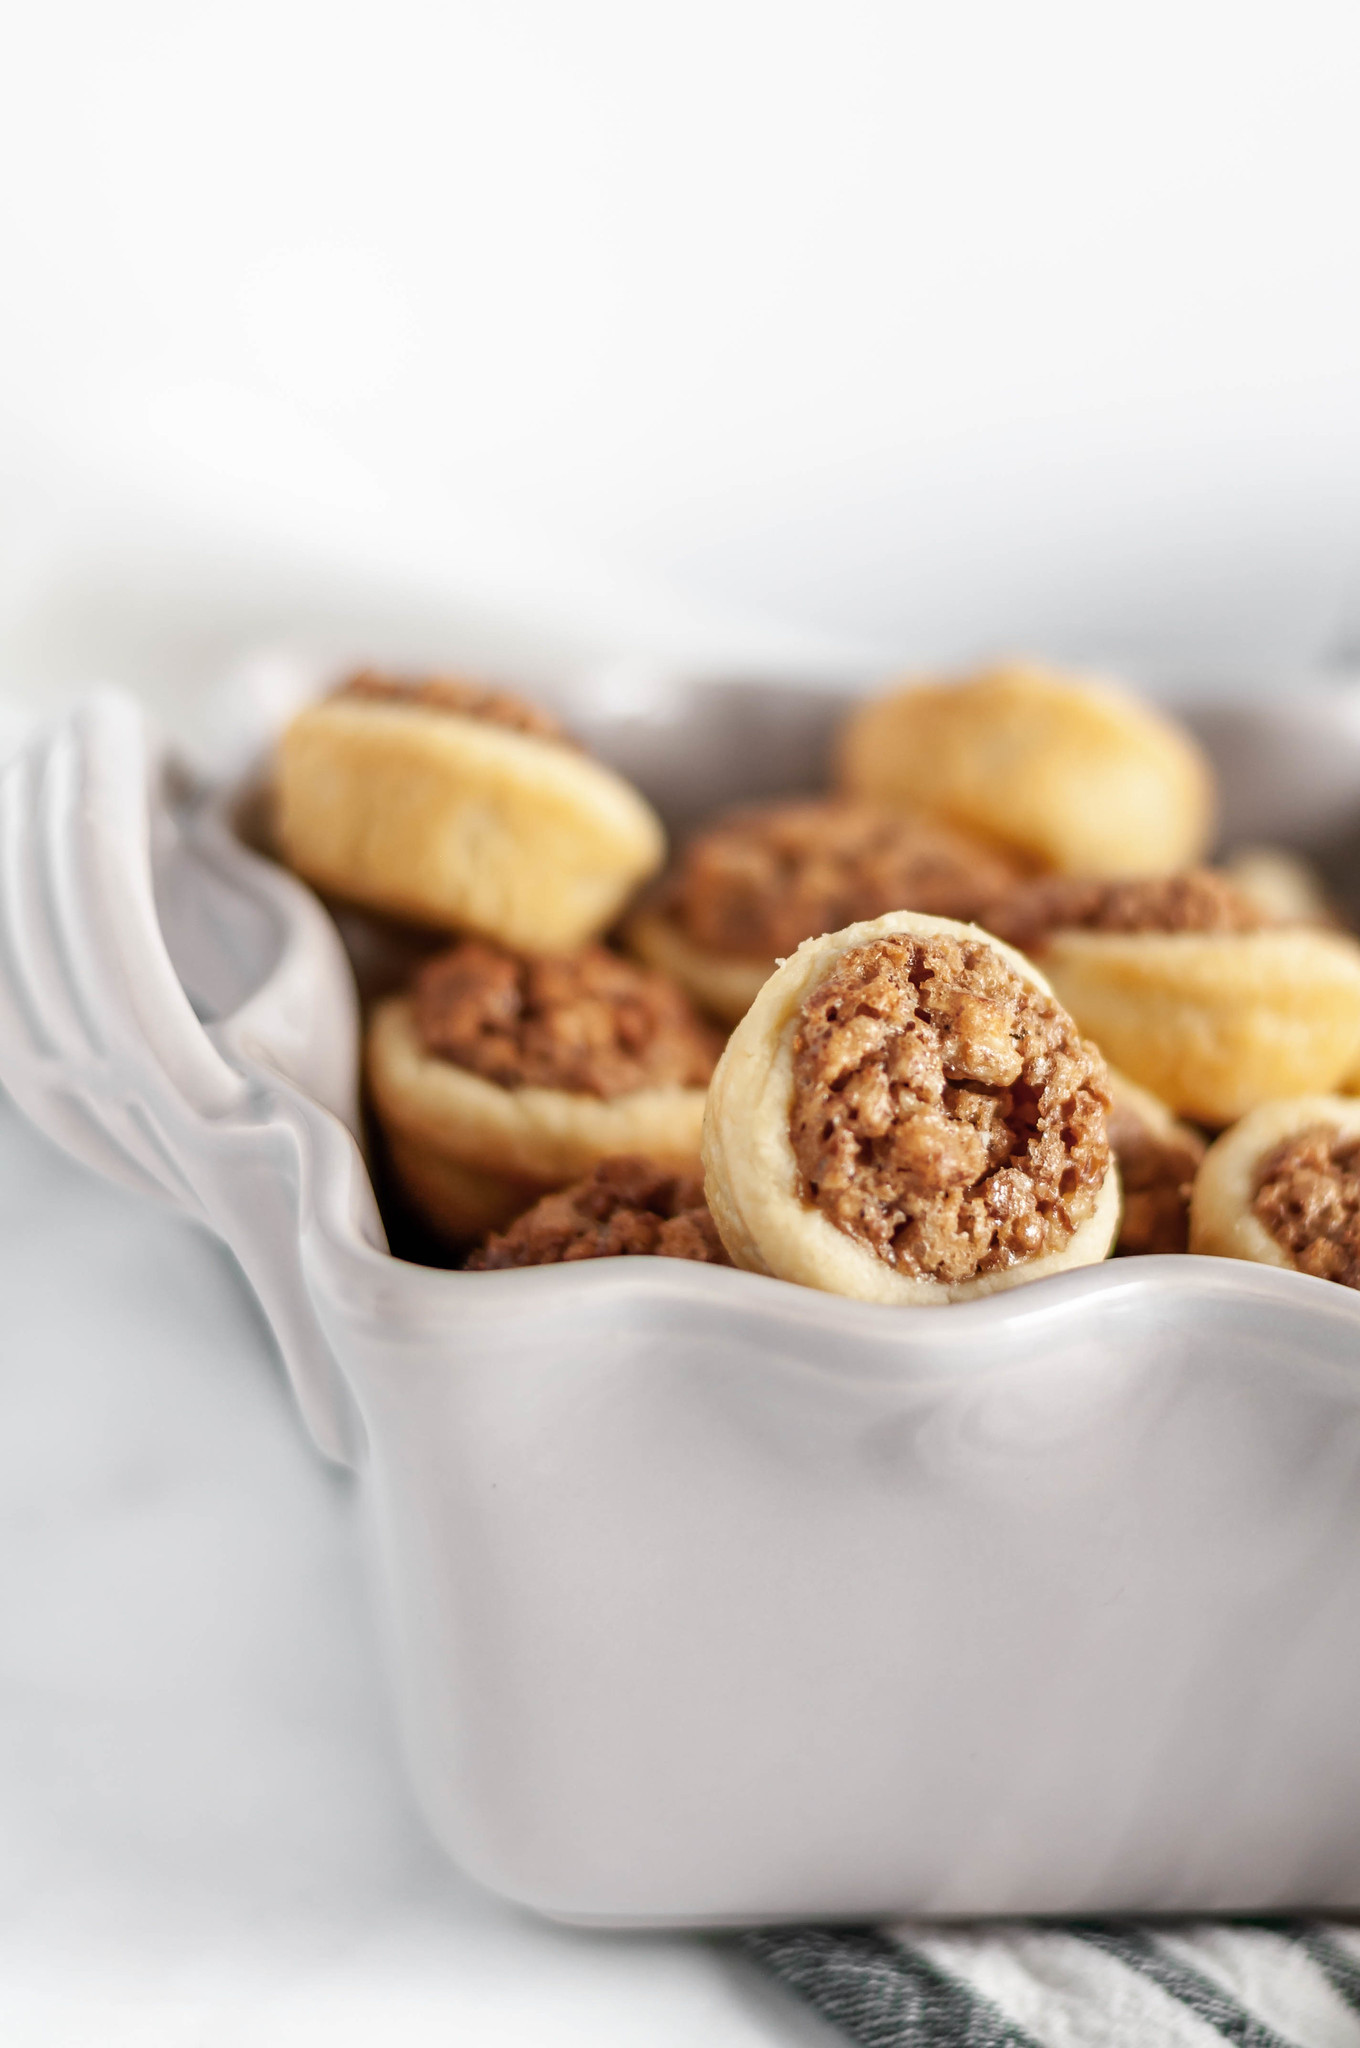 Mini Pecan Pies have all the traditional flavor of a traditional pecan pie in mini form and without the corn syrup. Only 40 minutes from start to finish make these a simple and delicious option for your Thanksgiving dessert table.